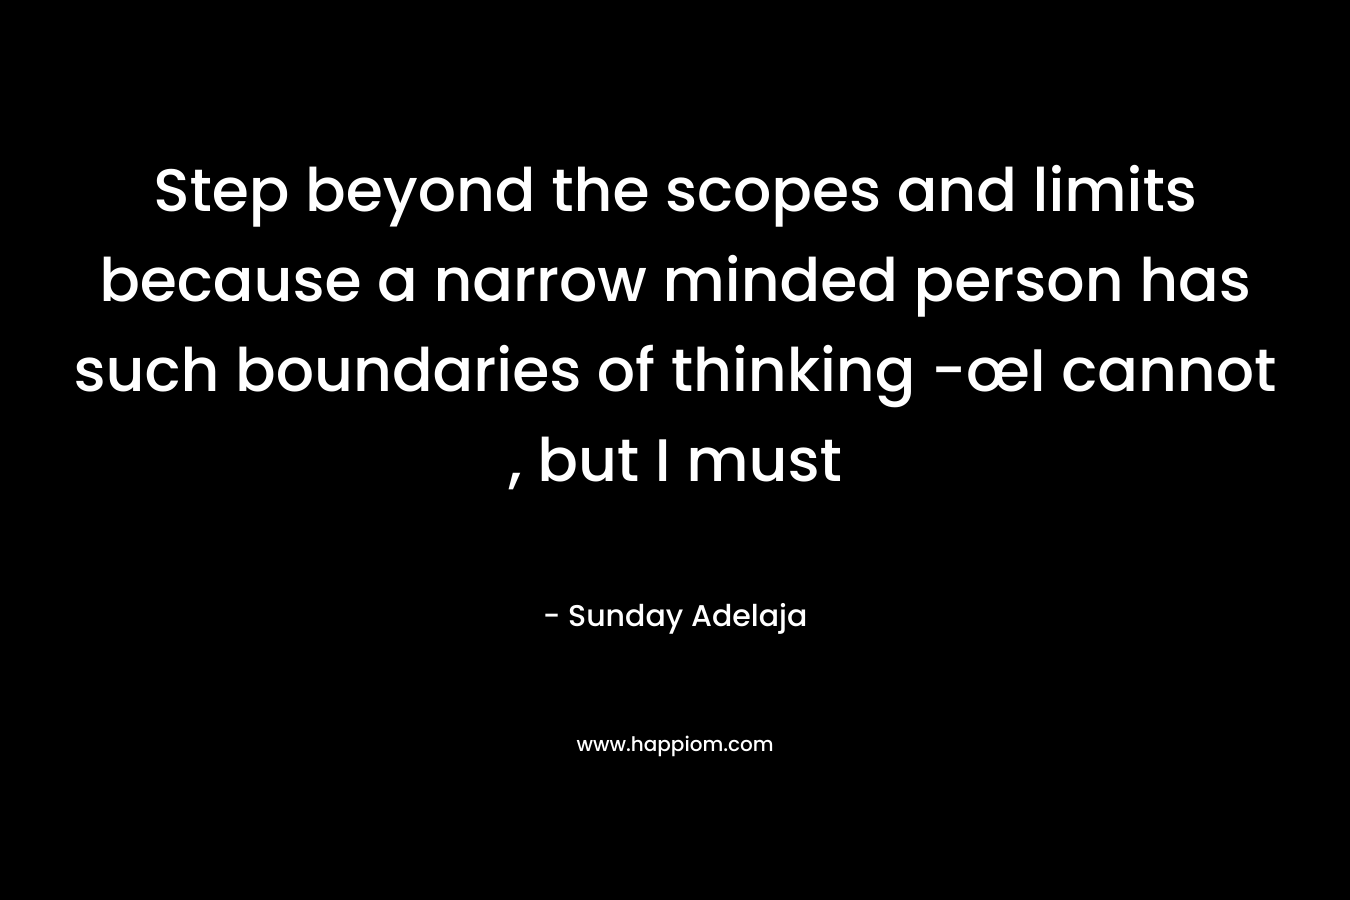 Step beyond the scopes and limits because a narrow minded person has such boundaries of thinking -œI cannot , but I must